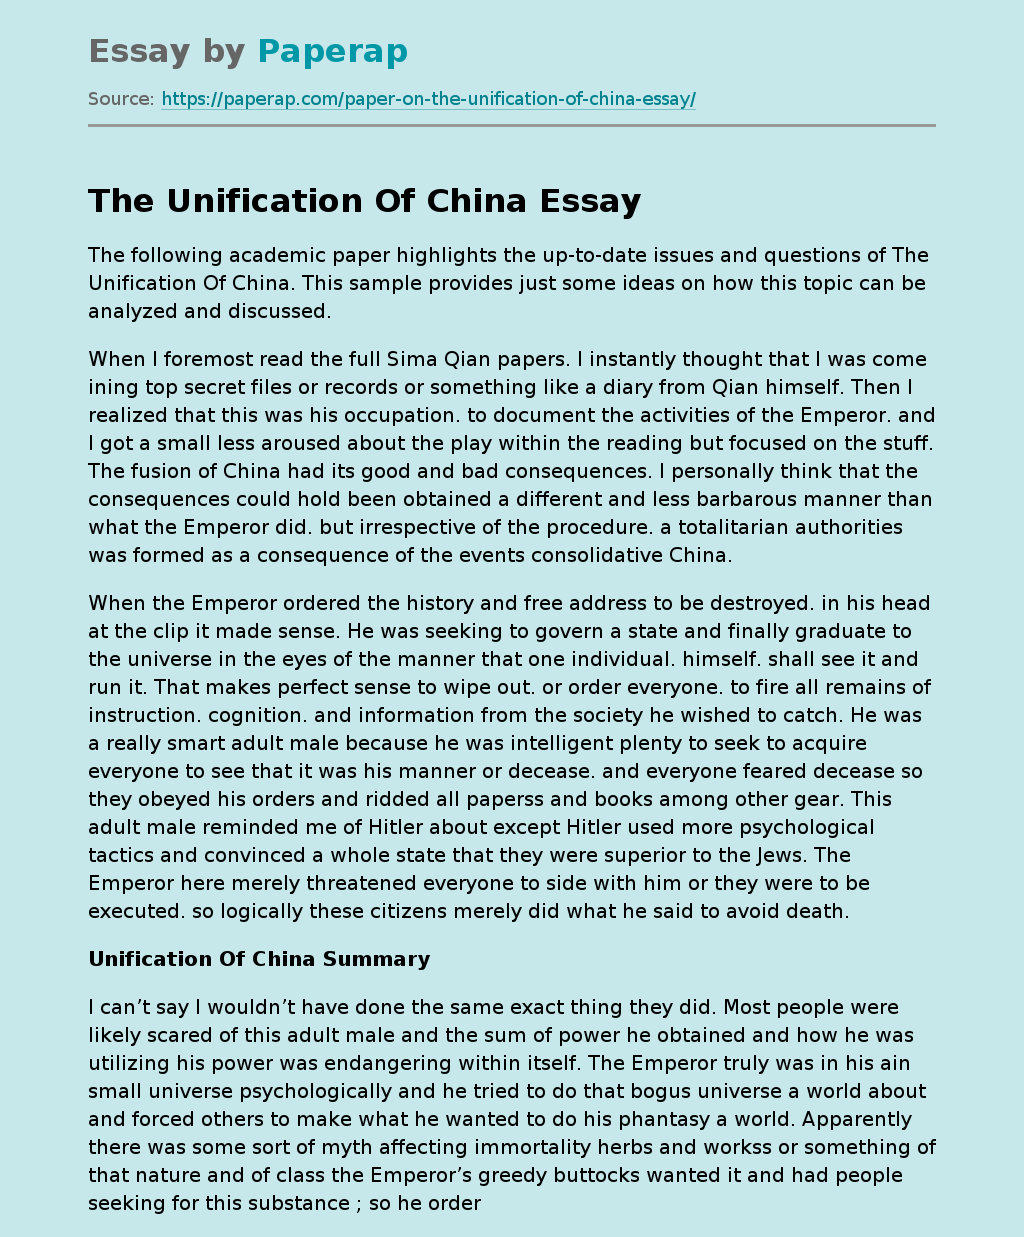 The Unification Of China